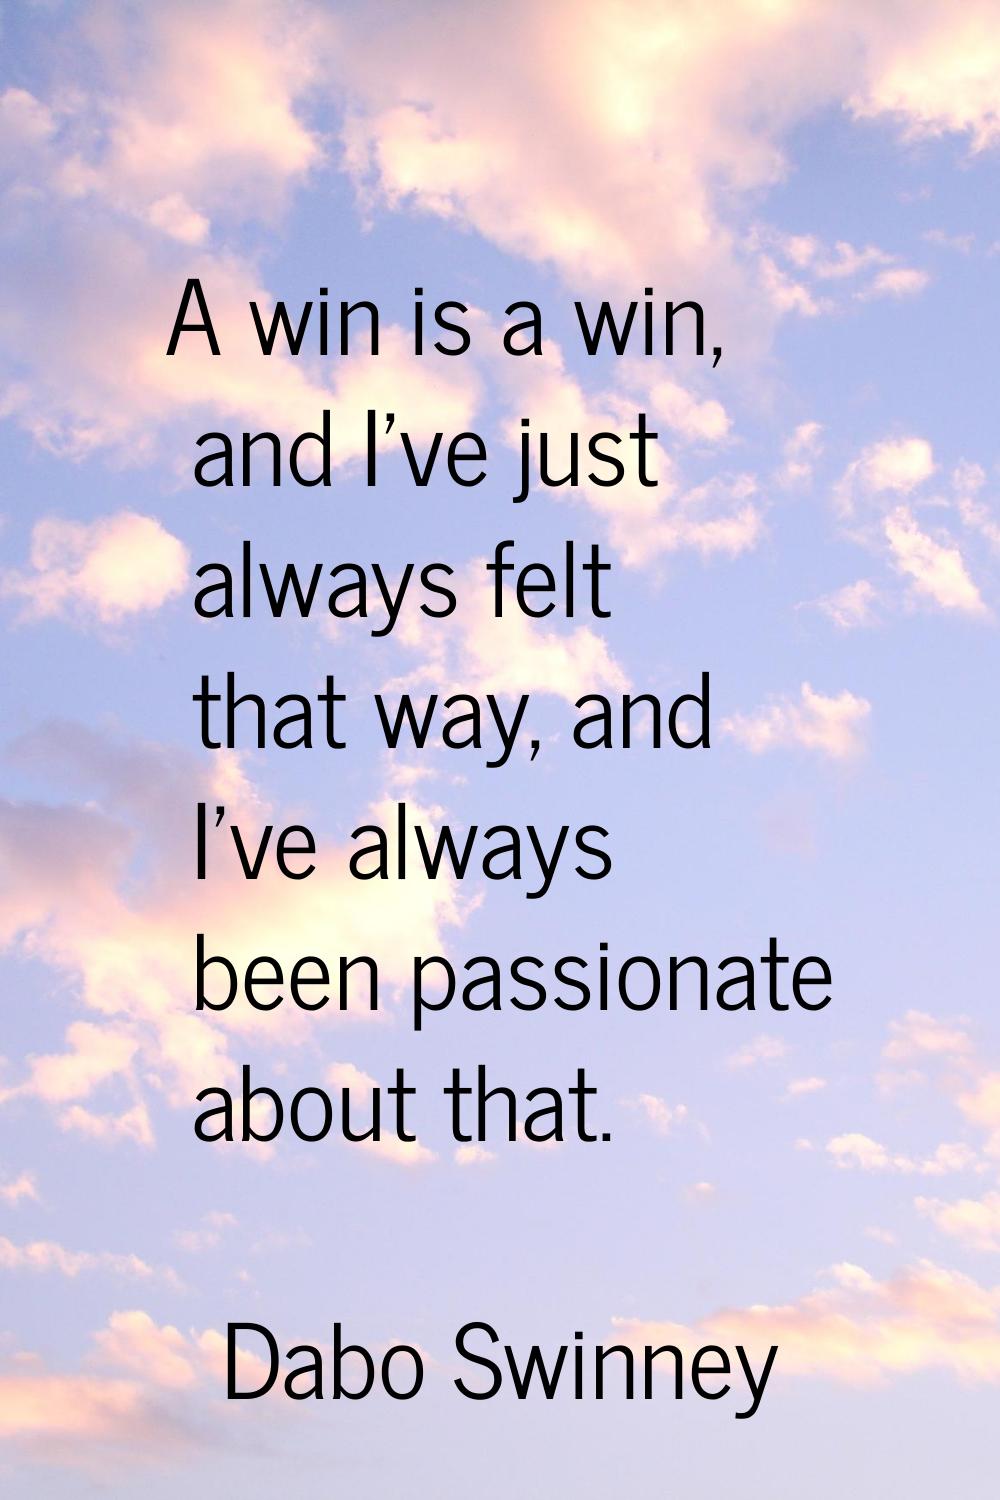 A win is a win, and I've just always felt that way, and I've always been passionate about that.